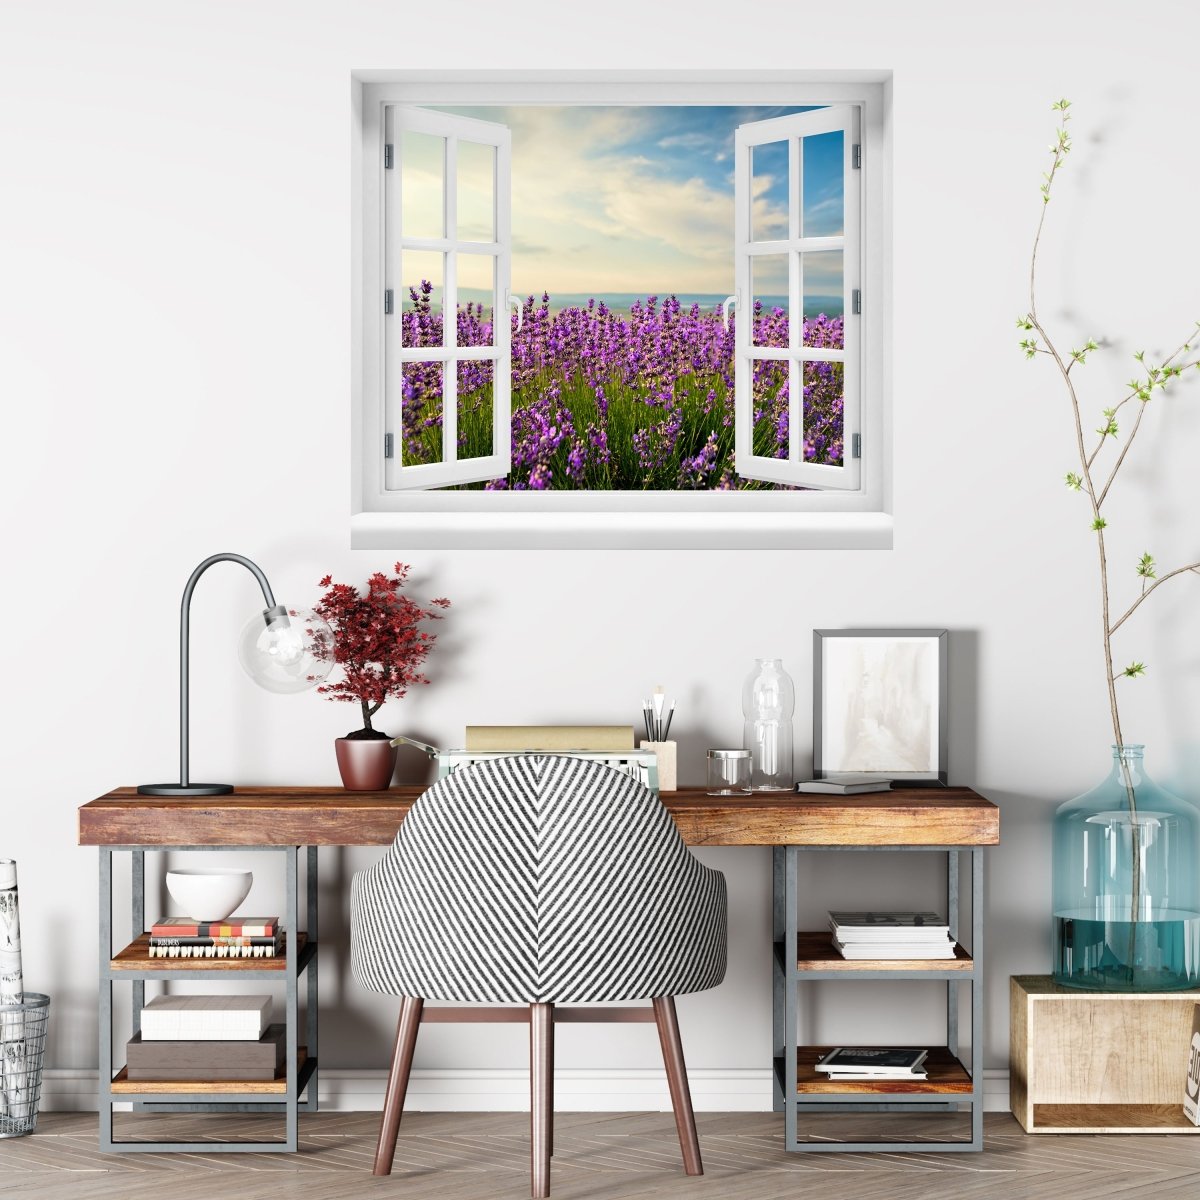 Lavender 3D wall sticker - Wall Decal M0411